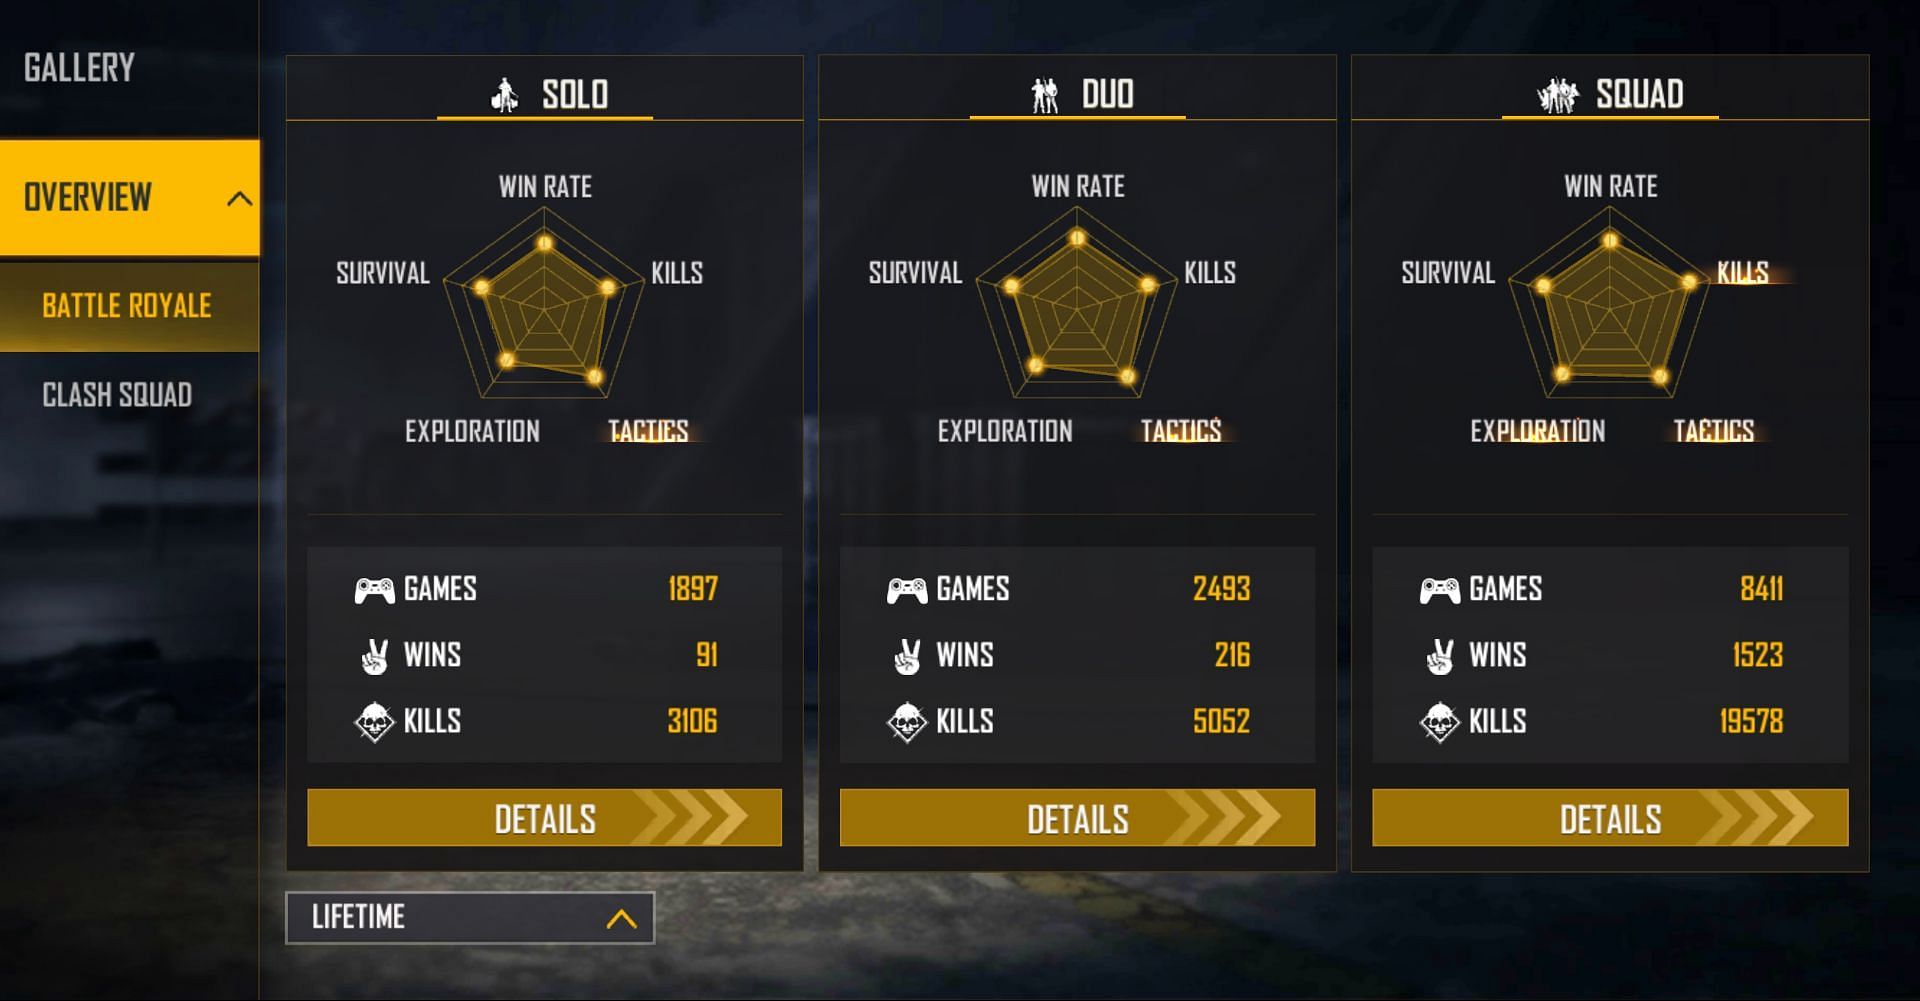 Rishi Gaming has 19k frags in the squad matches (Image via Free Fire)